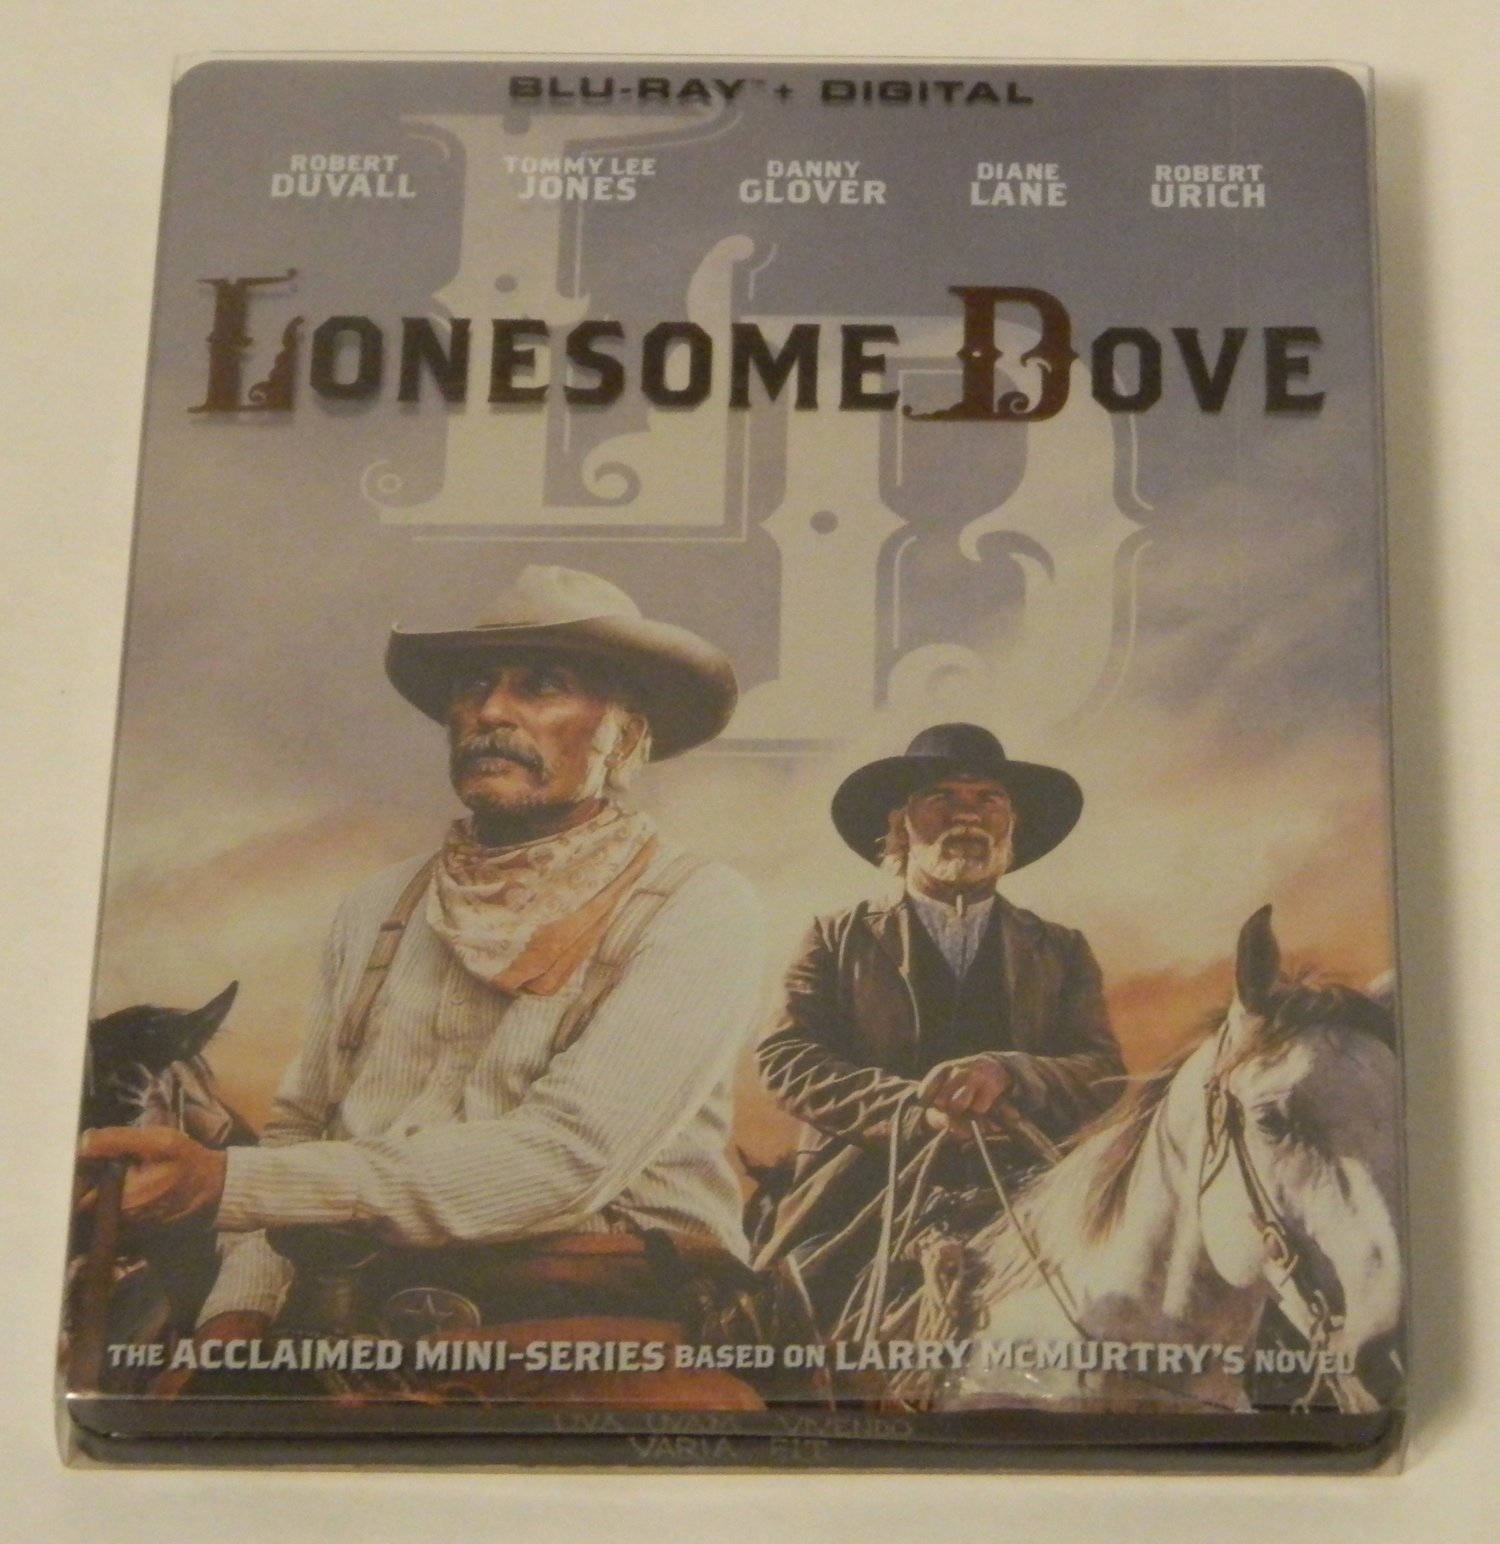 Lonesome Dove: SteelBook Edition Blu-ray Review